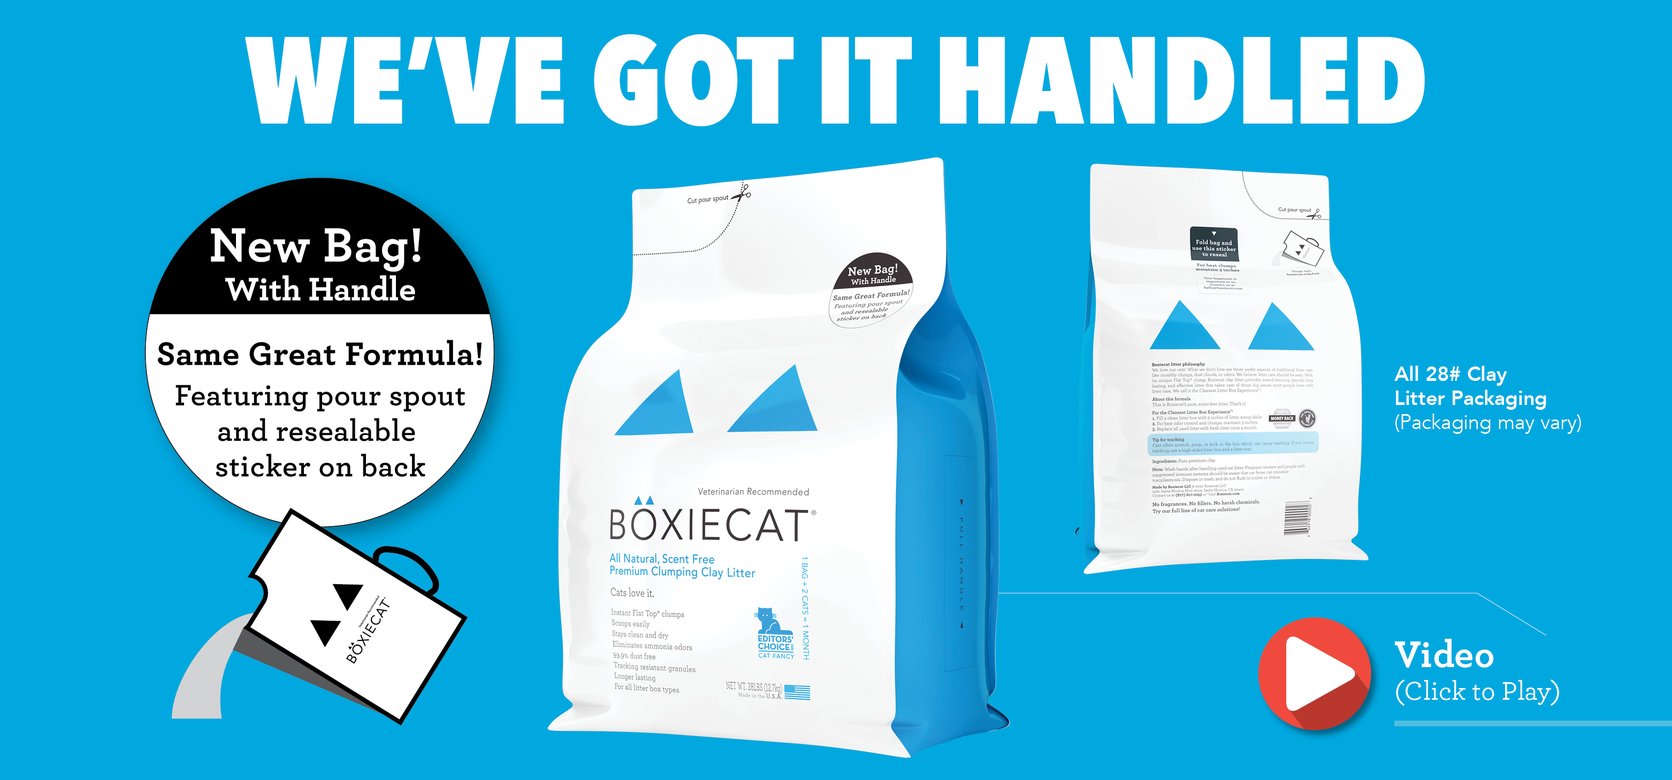 Boxiecat 28 lb Clay Litter Bags Now Have Handles